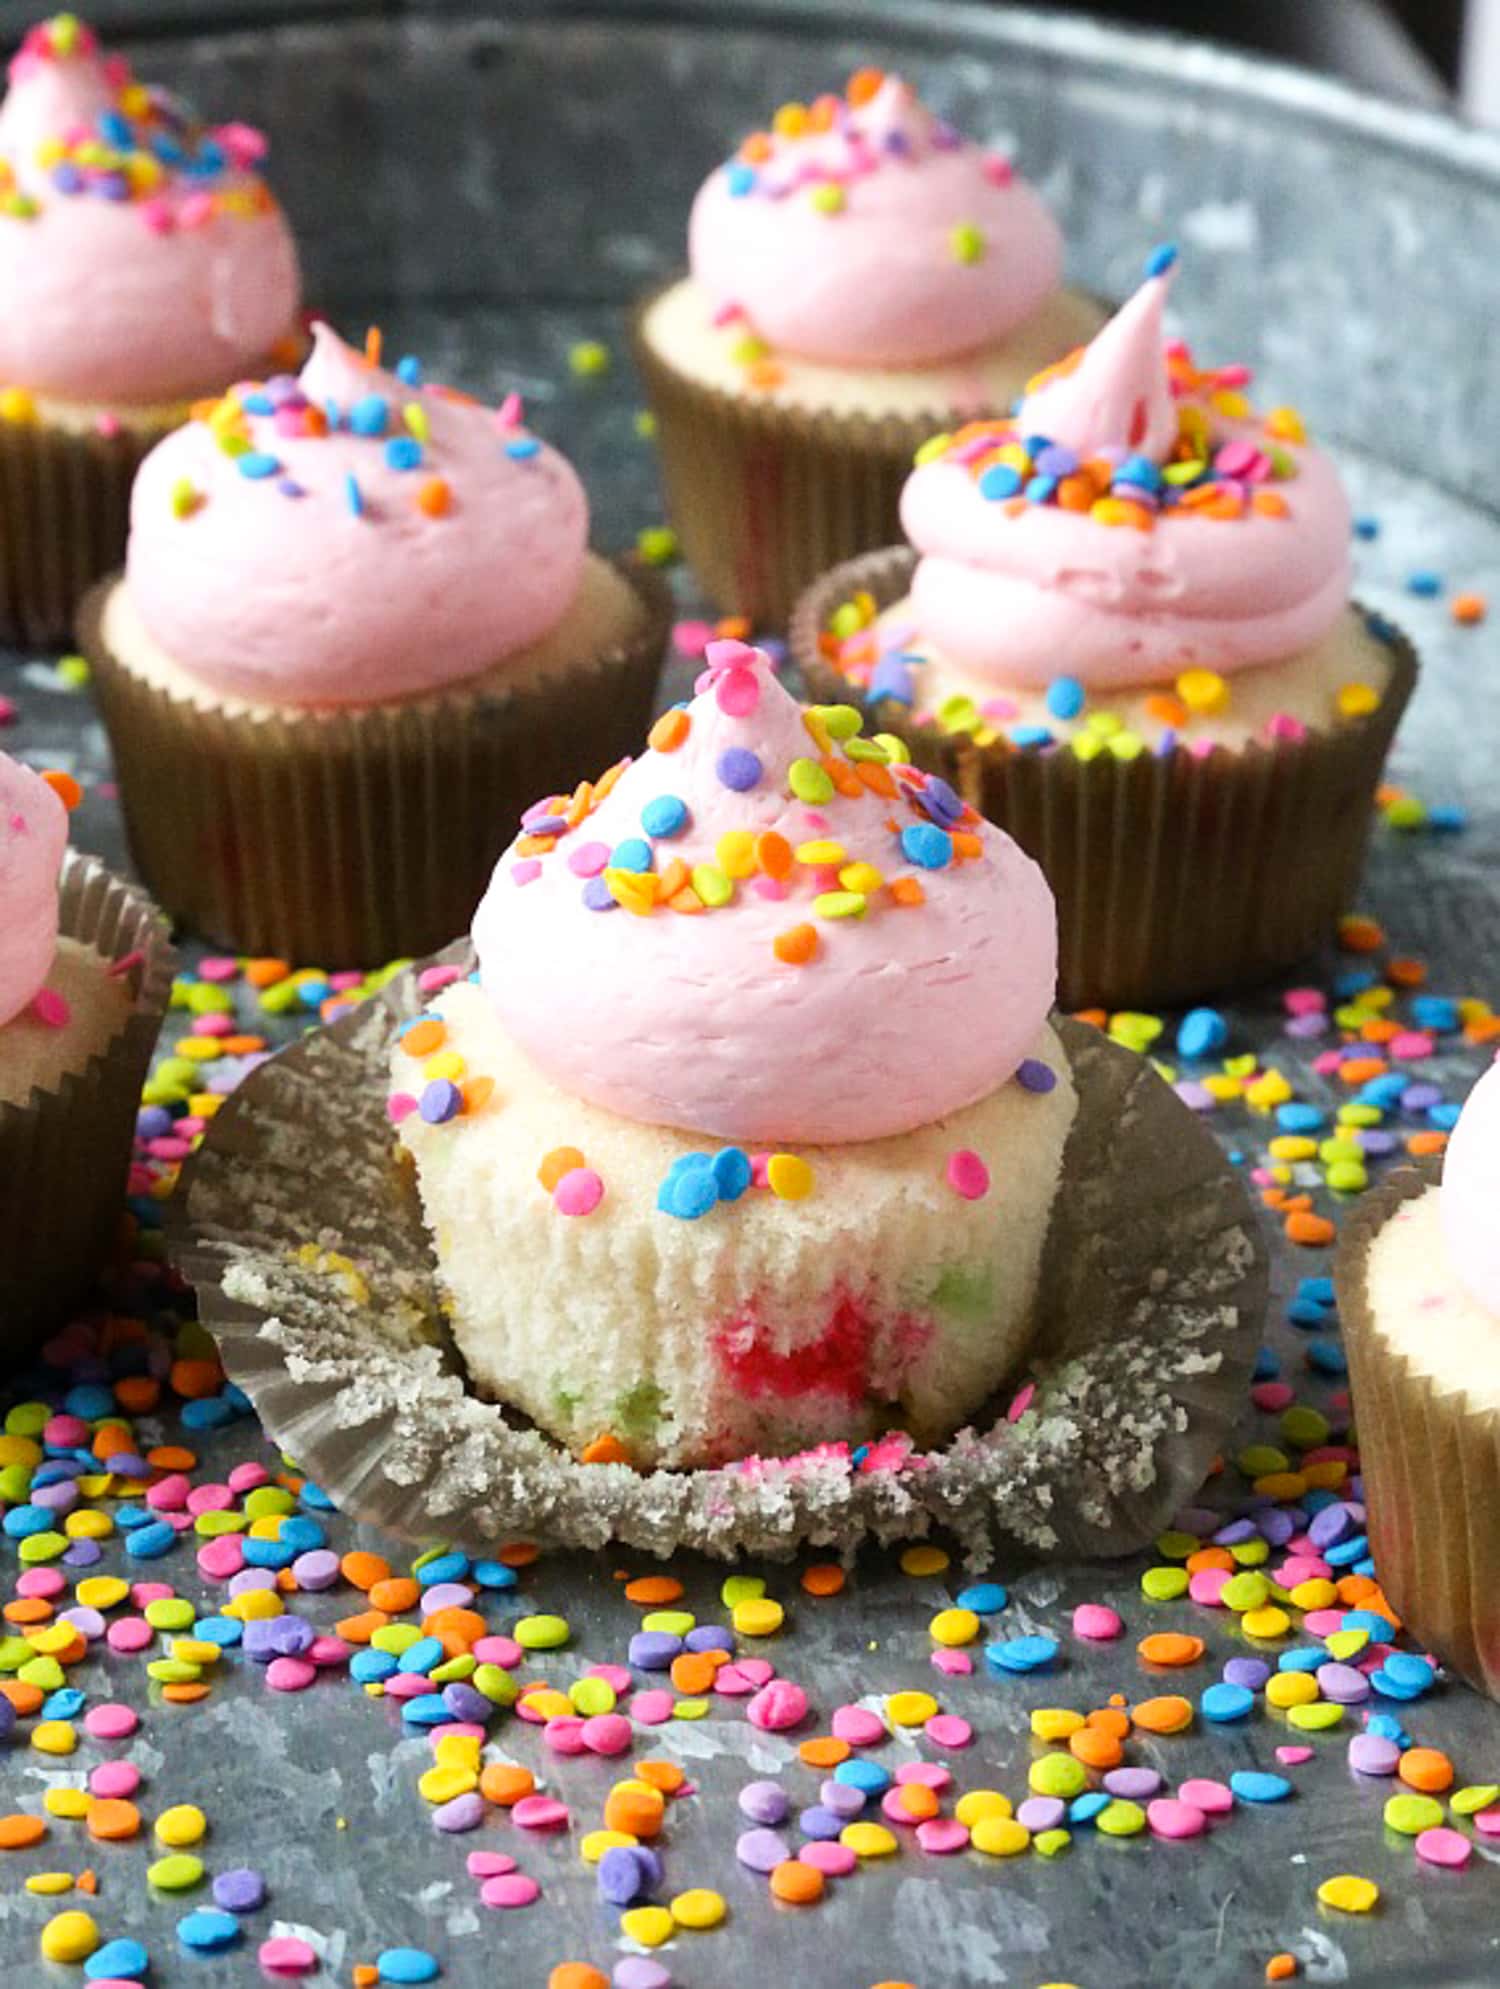 A sprinkle cupcake with the liner peeled back topped with pink buttercream frosting and sprinkles